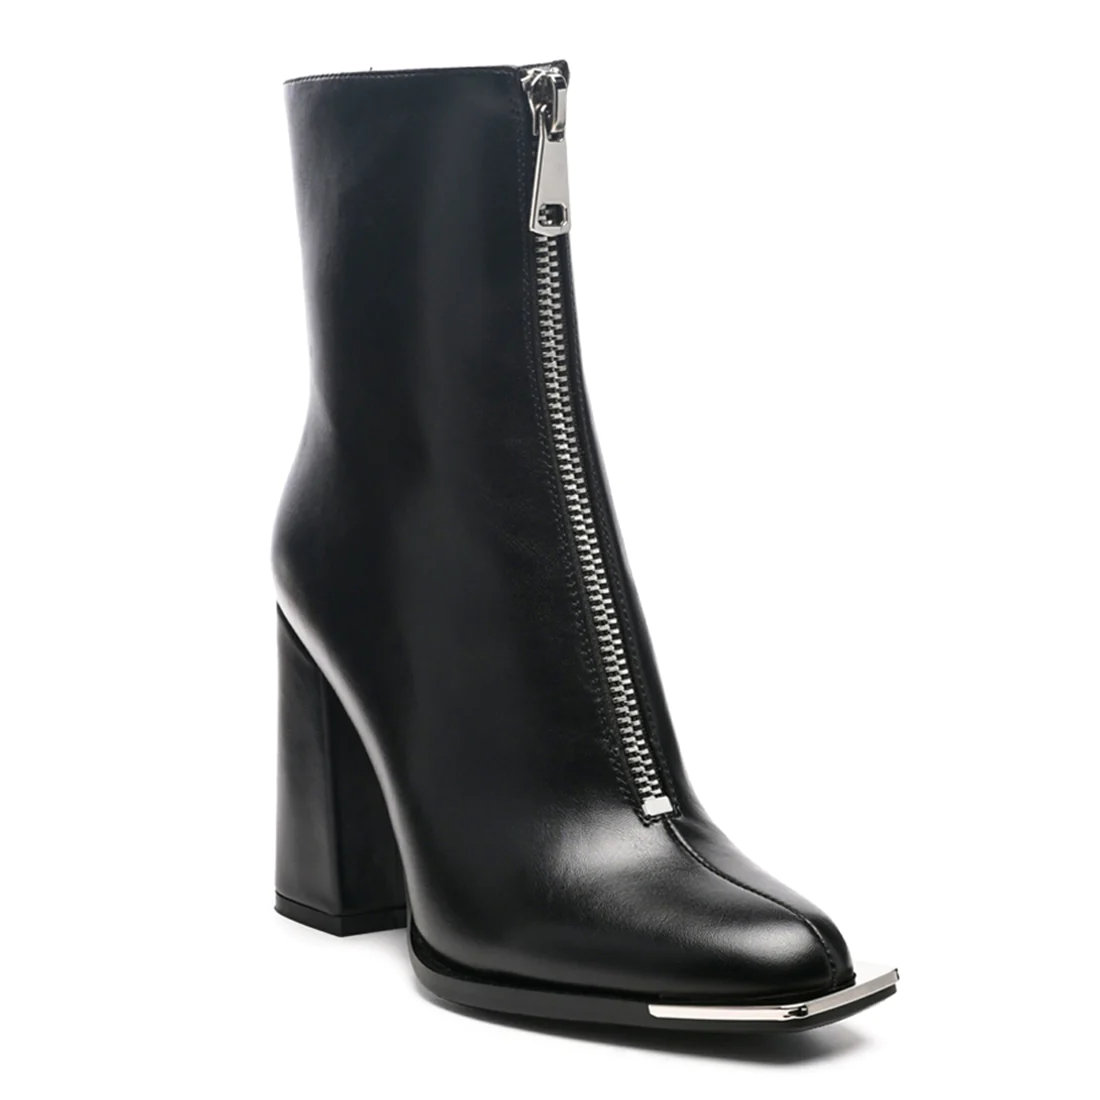 SQUARE TOE ANKLE BOOT IN BLACK